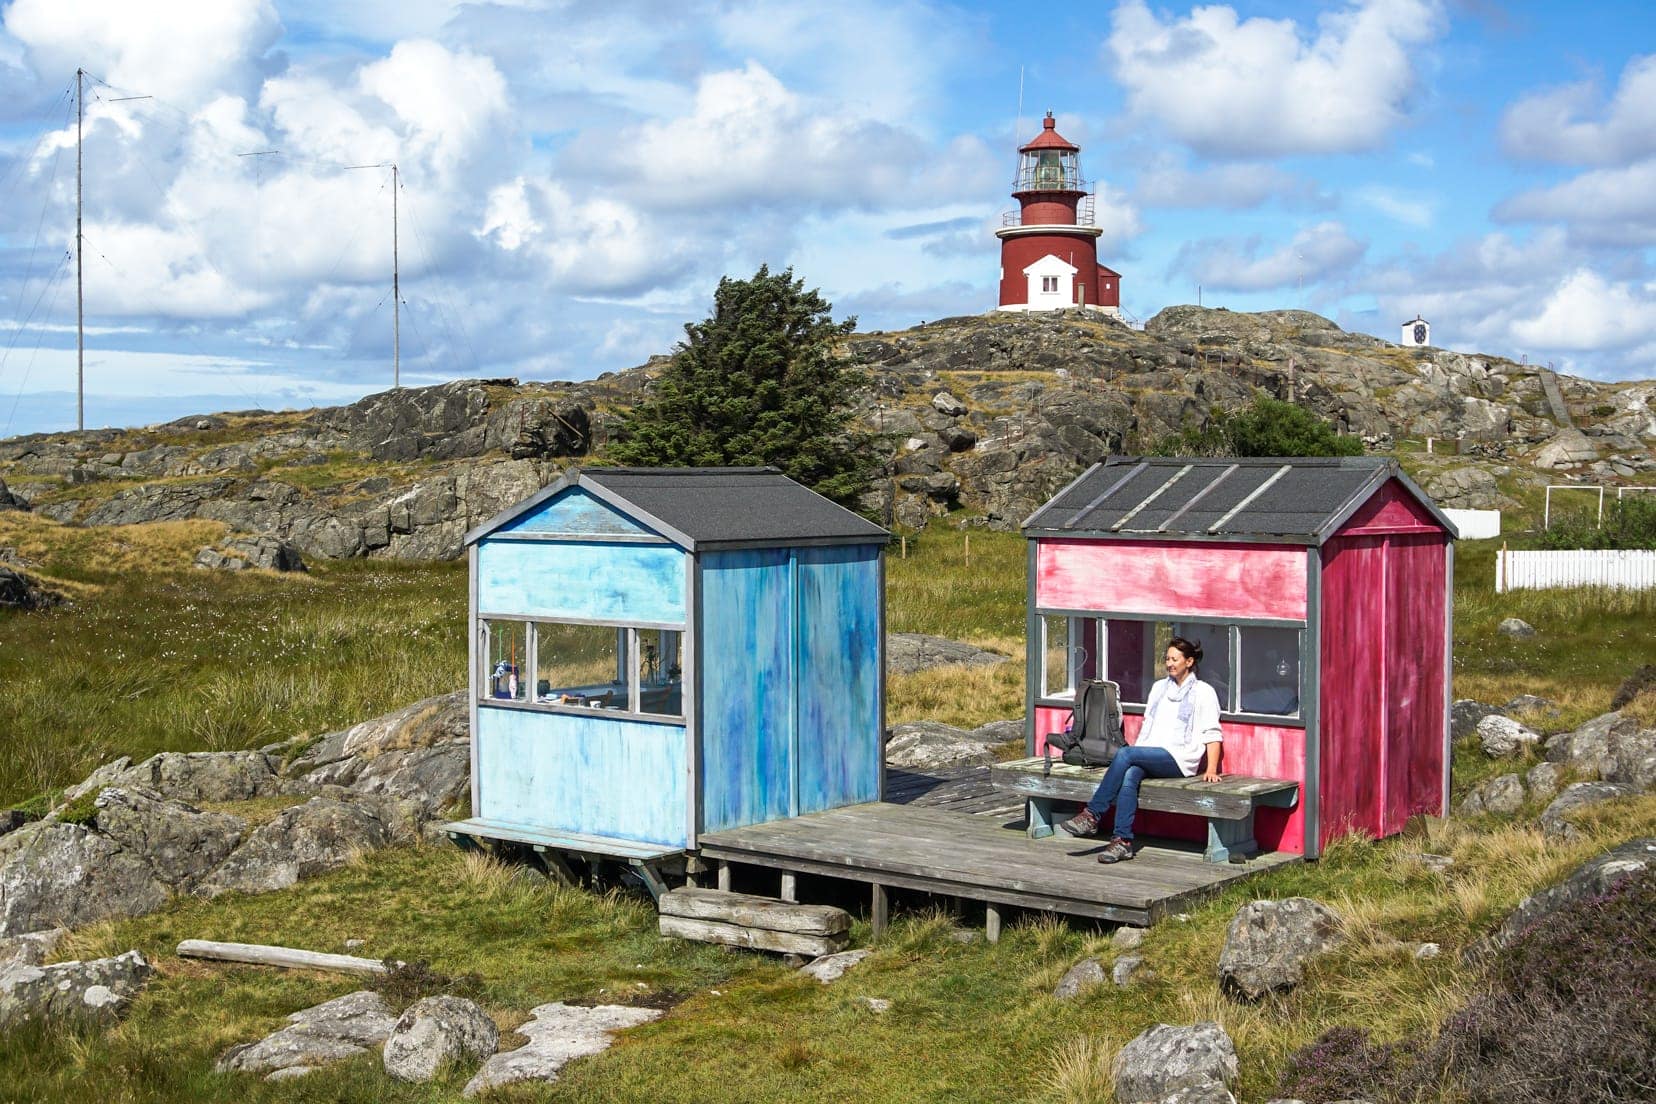  2 coloured huts in a tranquil setting with lighthouse in background